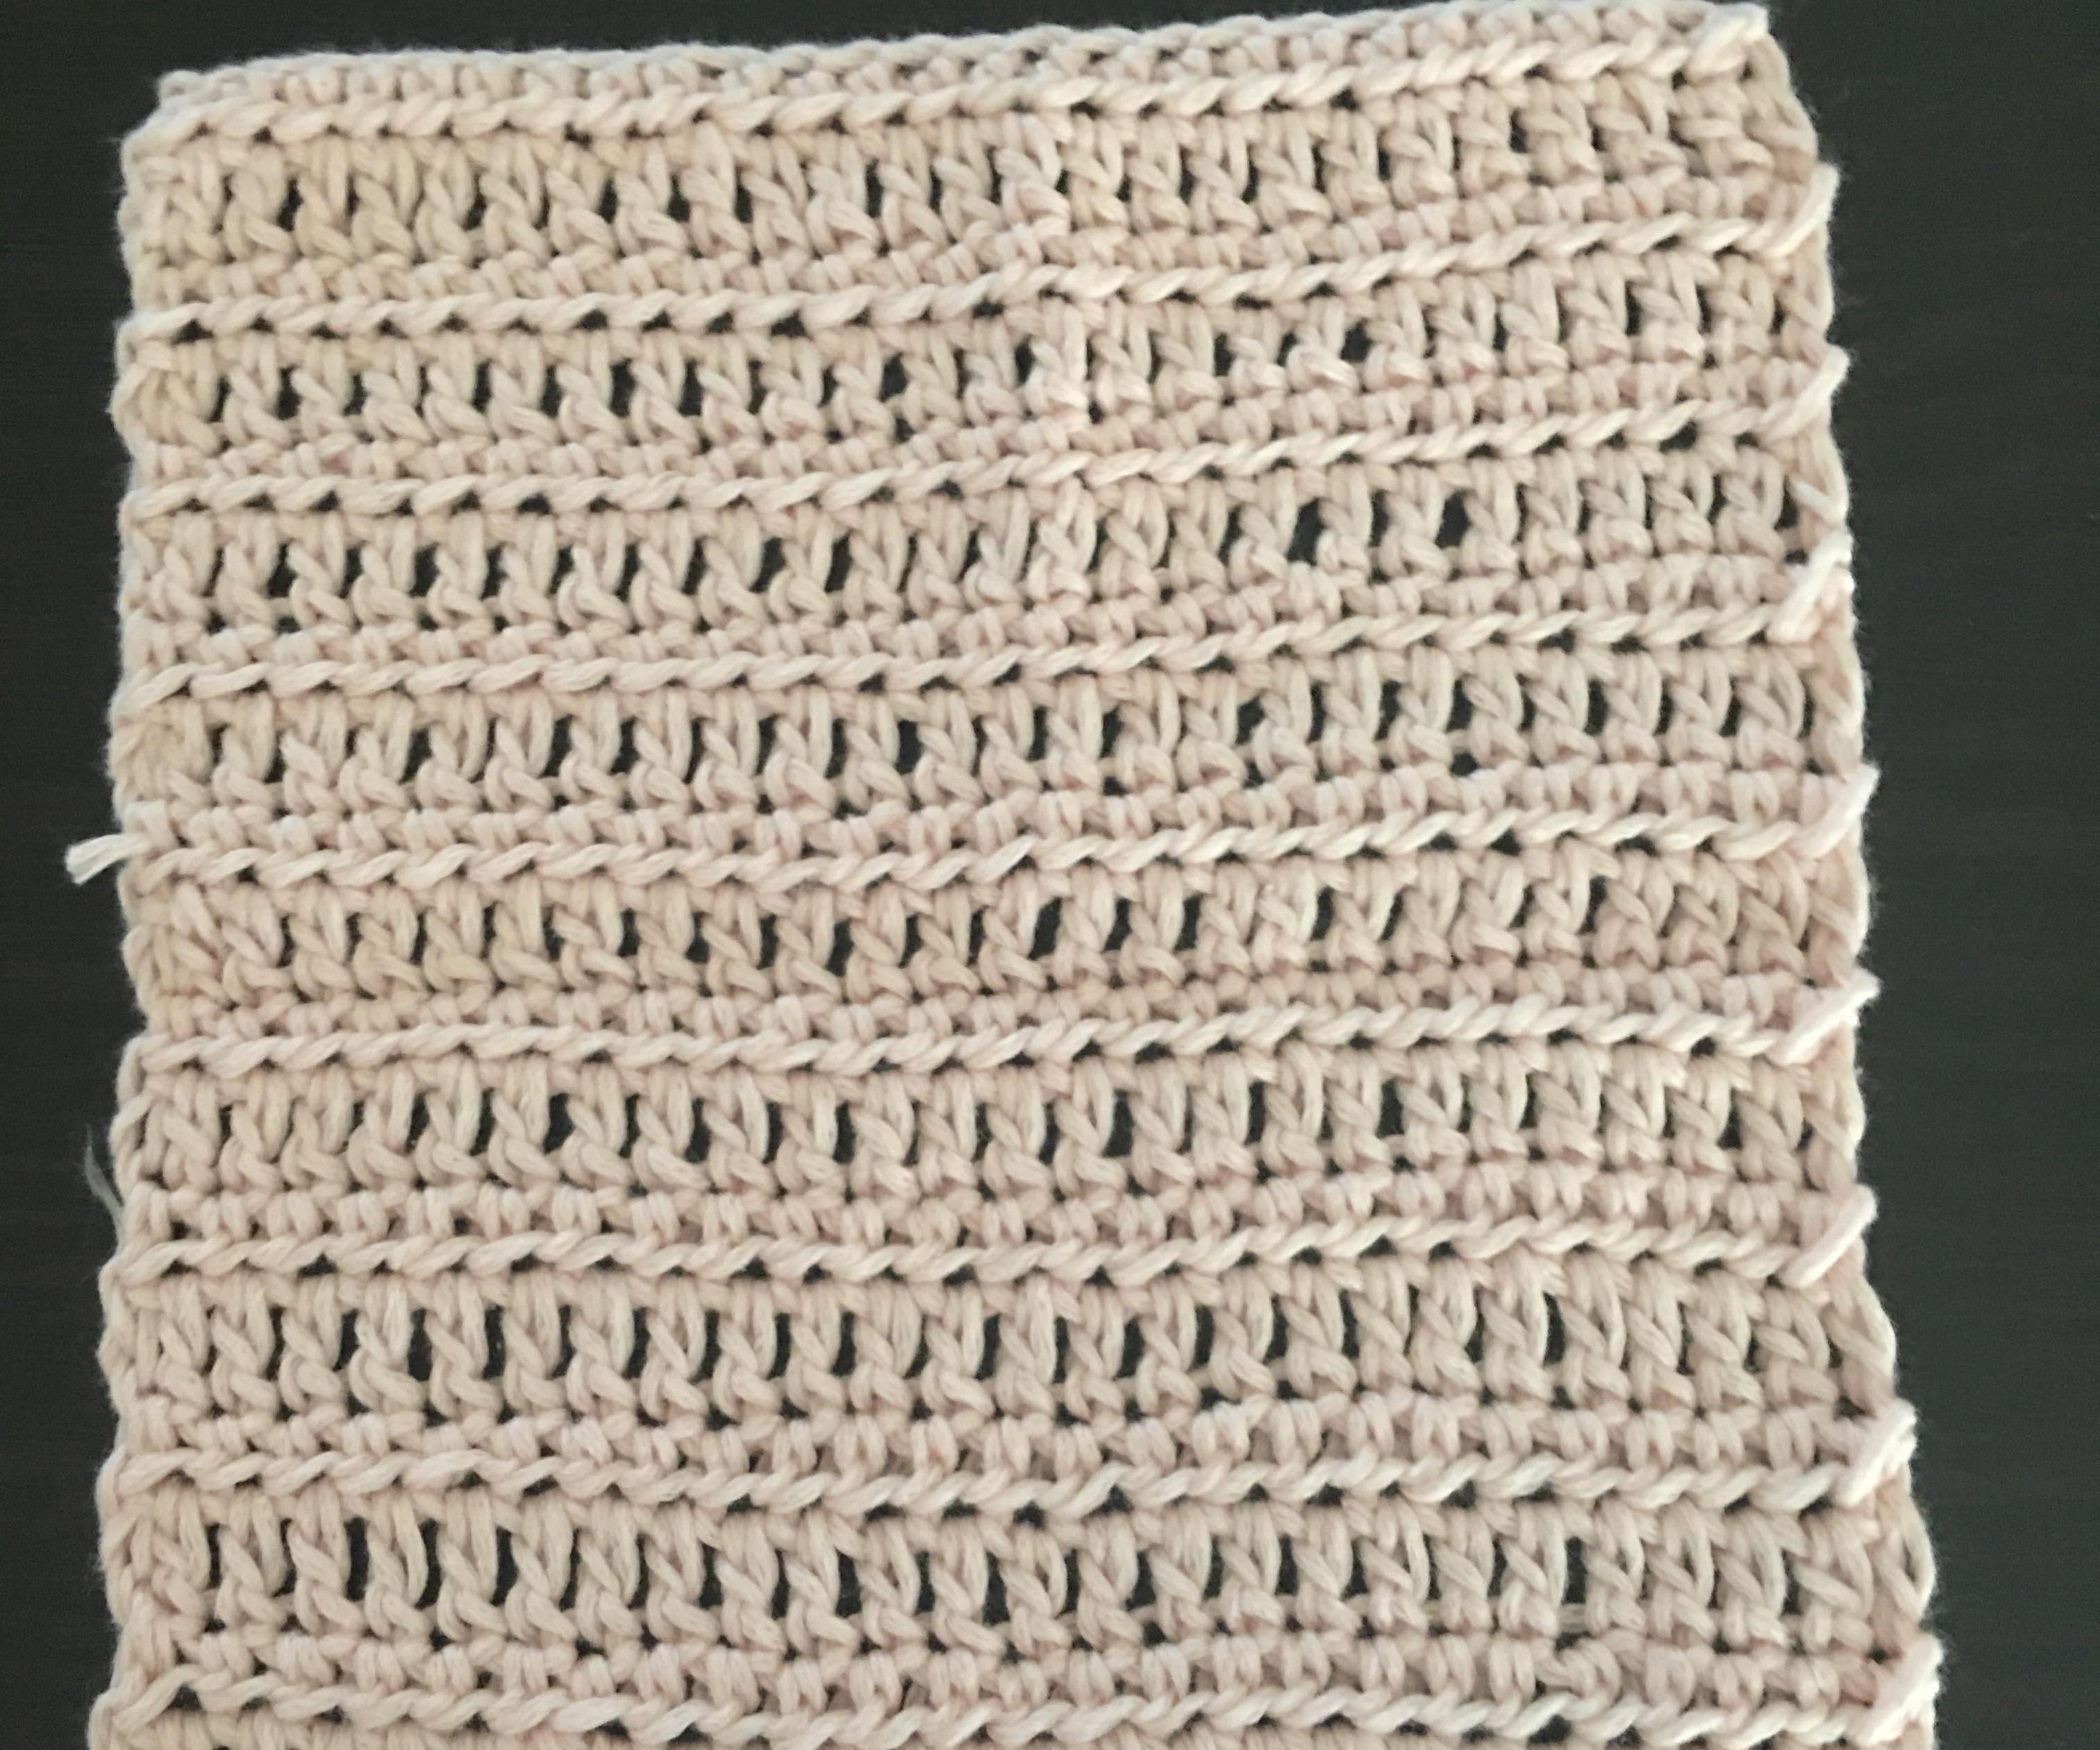 How to Crochet a Dish Towel